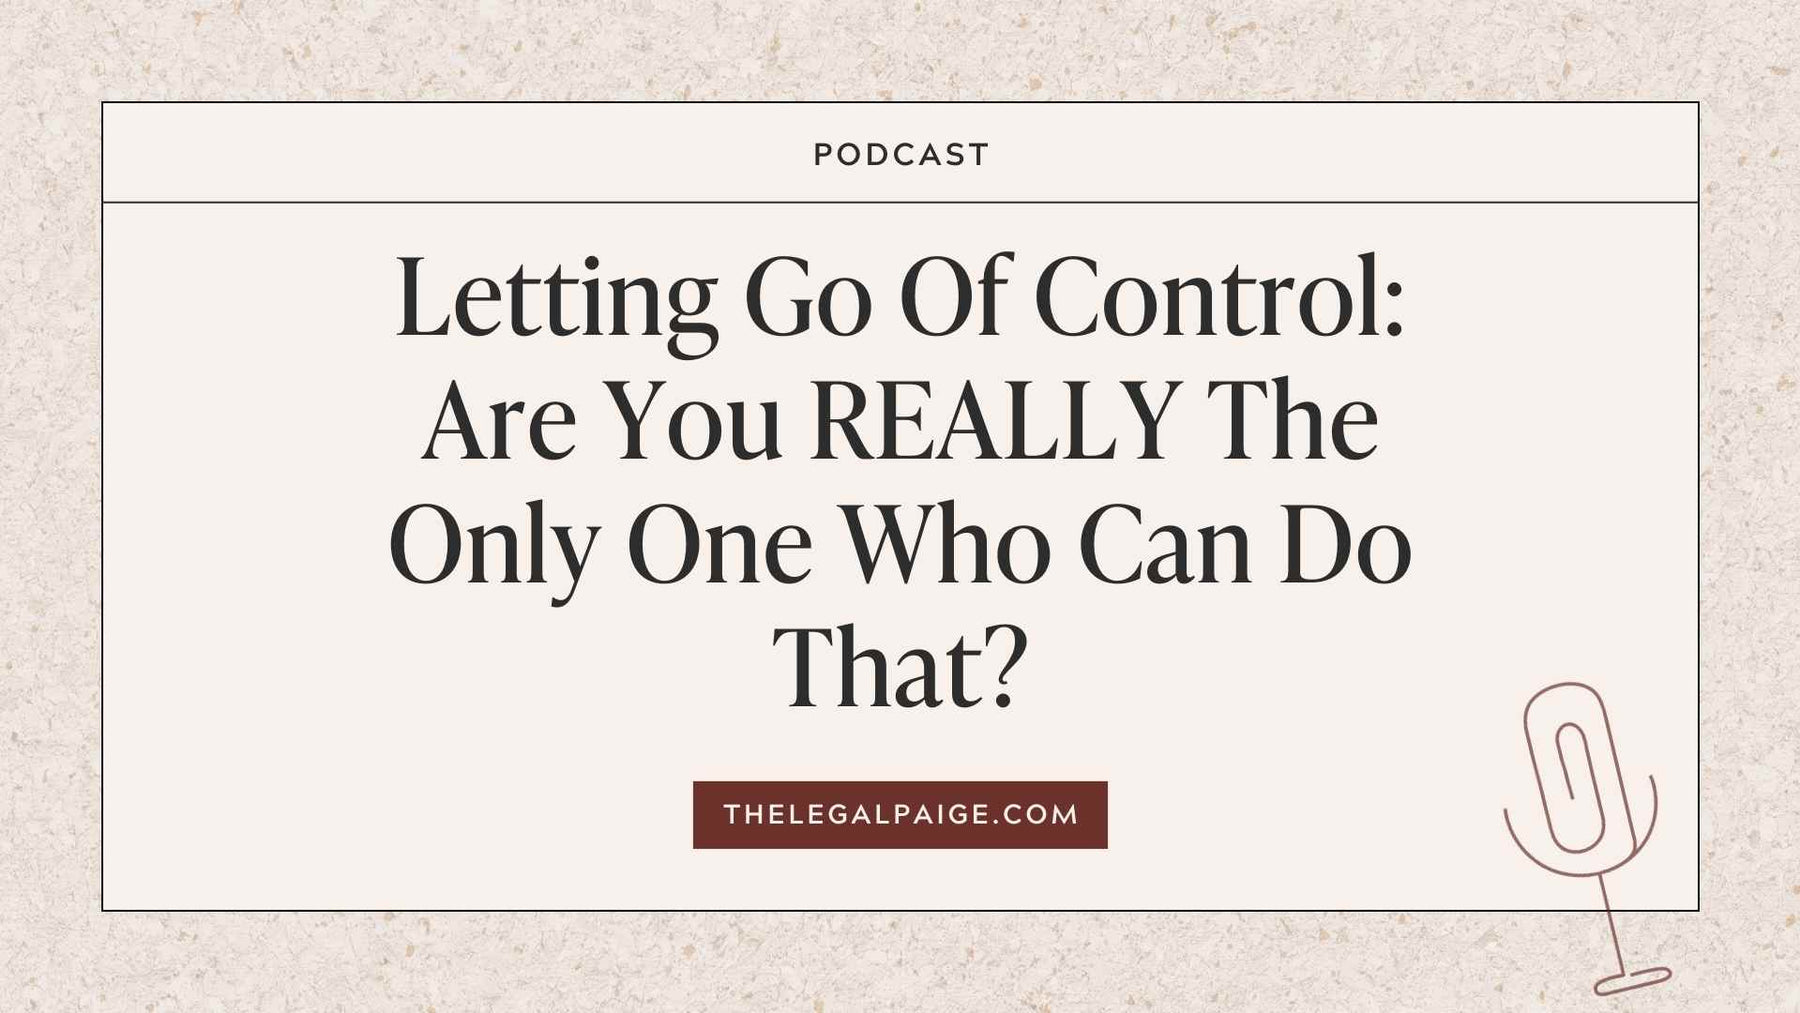 Episode 92: Letting Go Of Control: Are You REALLY The Only One Who Can Do That?